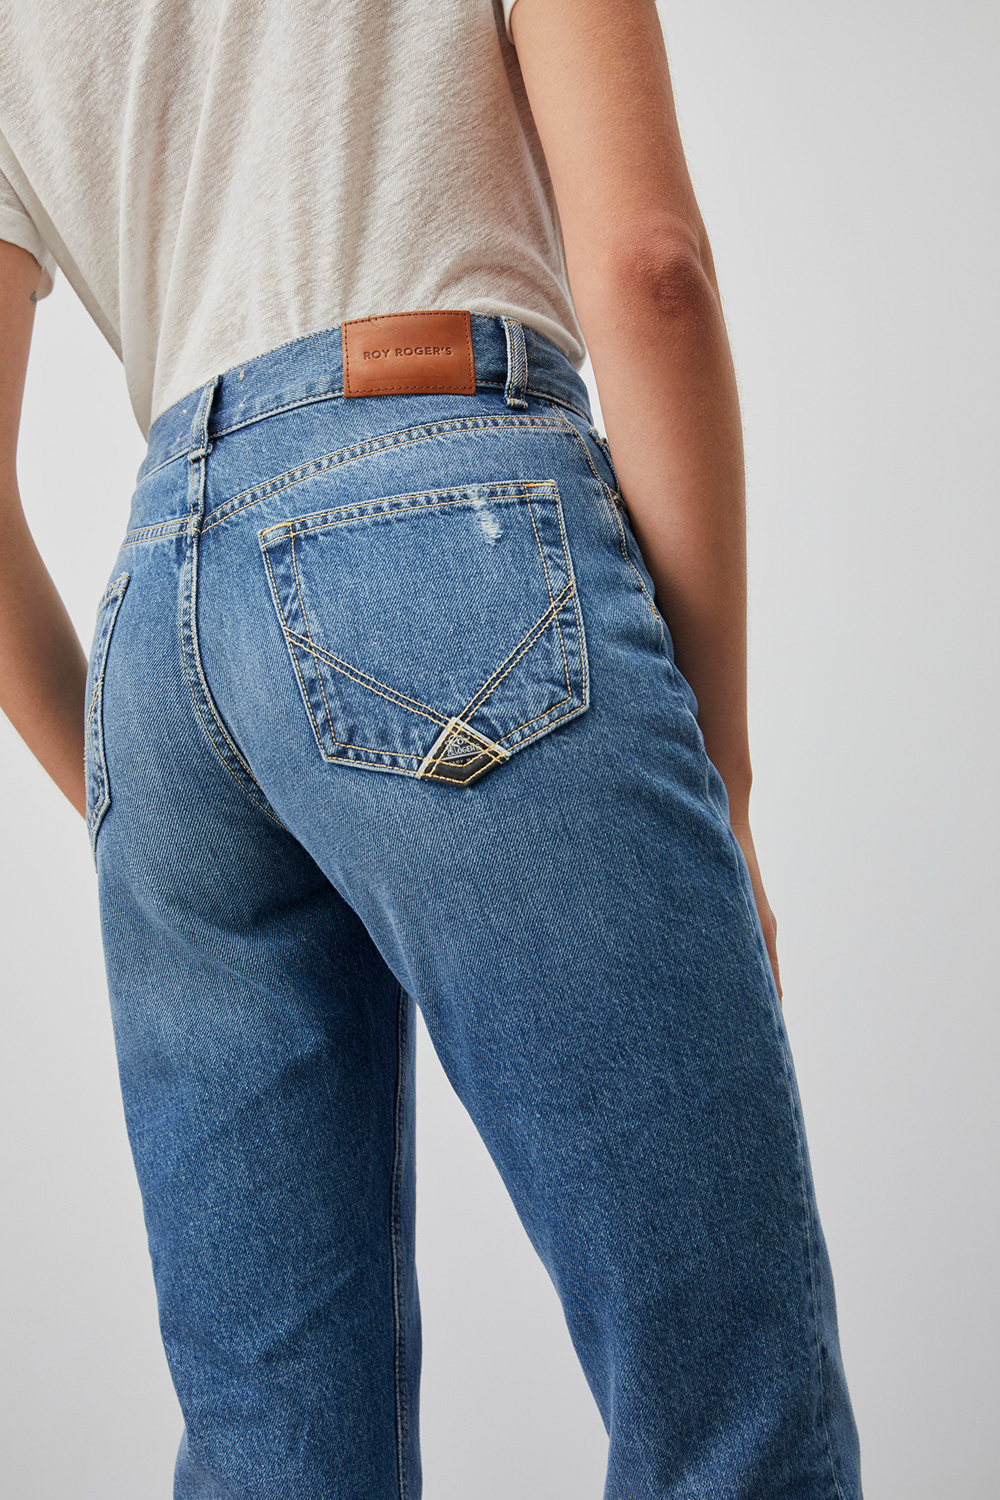 ROY ROGERS: JEANS FRANCY ICONIC